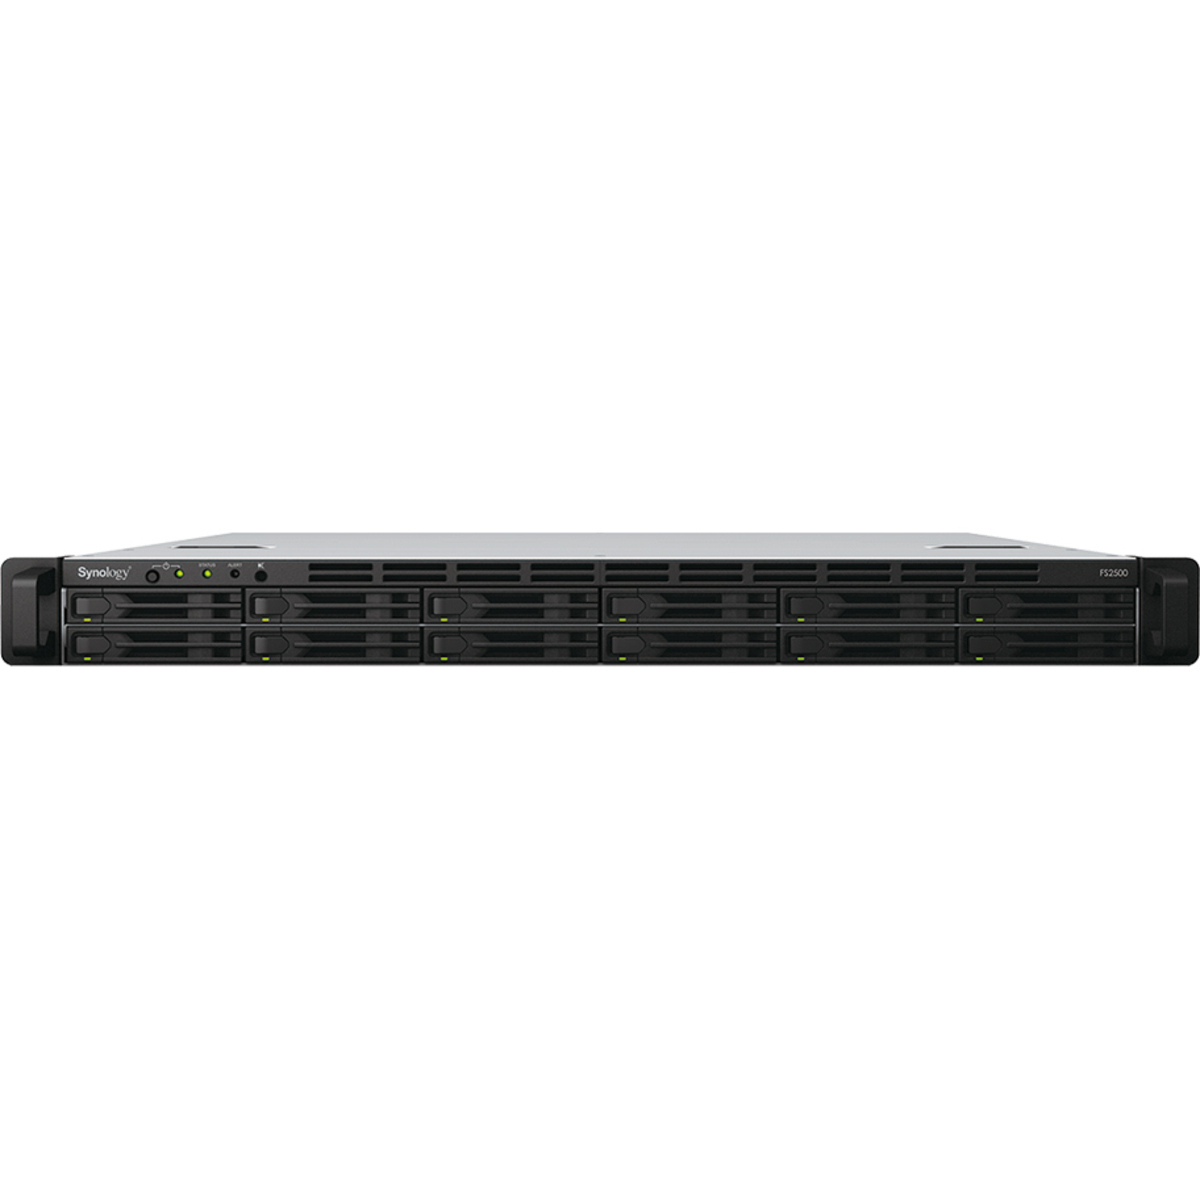 Synology FlashStation FS2500 80tb 12-Bay RackMount Large Business / Enterprise NAS - Network Attached Storage Device 10x8tb Samsung 870 QVO MZ-77Q8T0 2.5 560/530MB/s SATA 6Gb/s SSD CONSUMER Class Drives Installed - Burn-In Tested - FREE RAM UPGRADE FlashStation FS2500